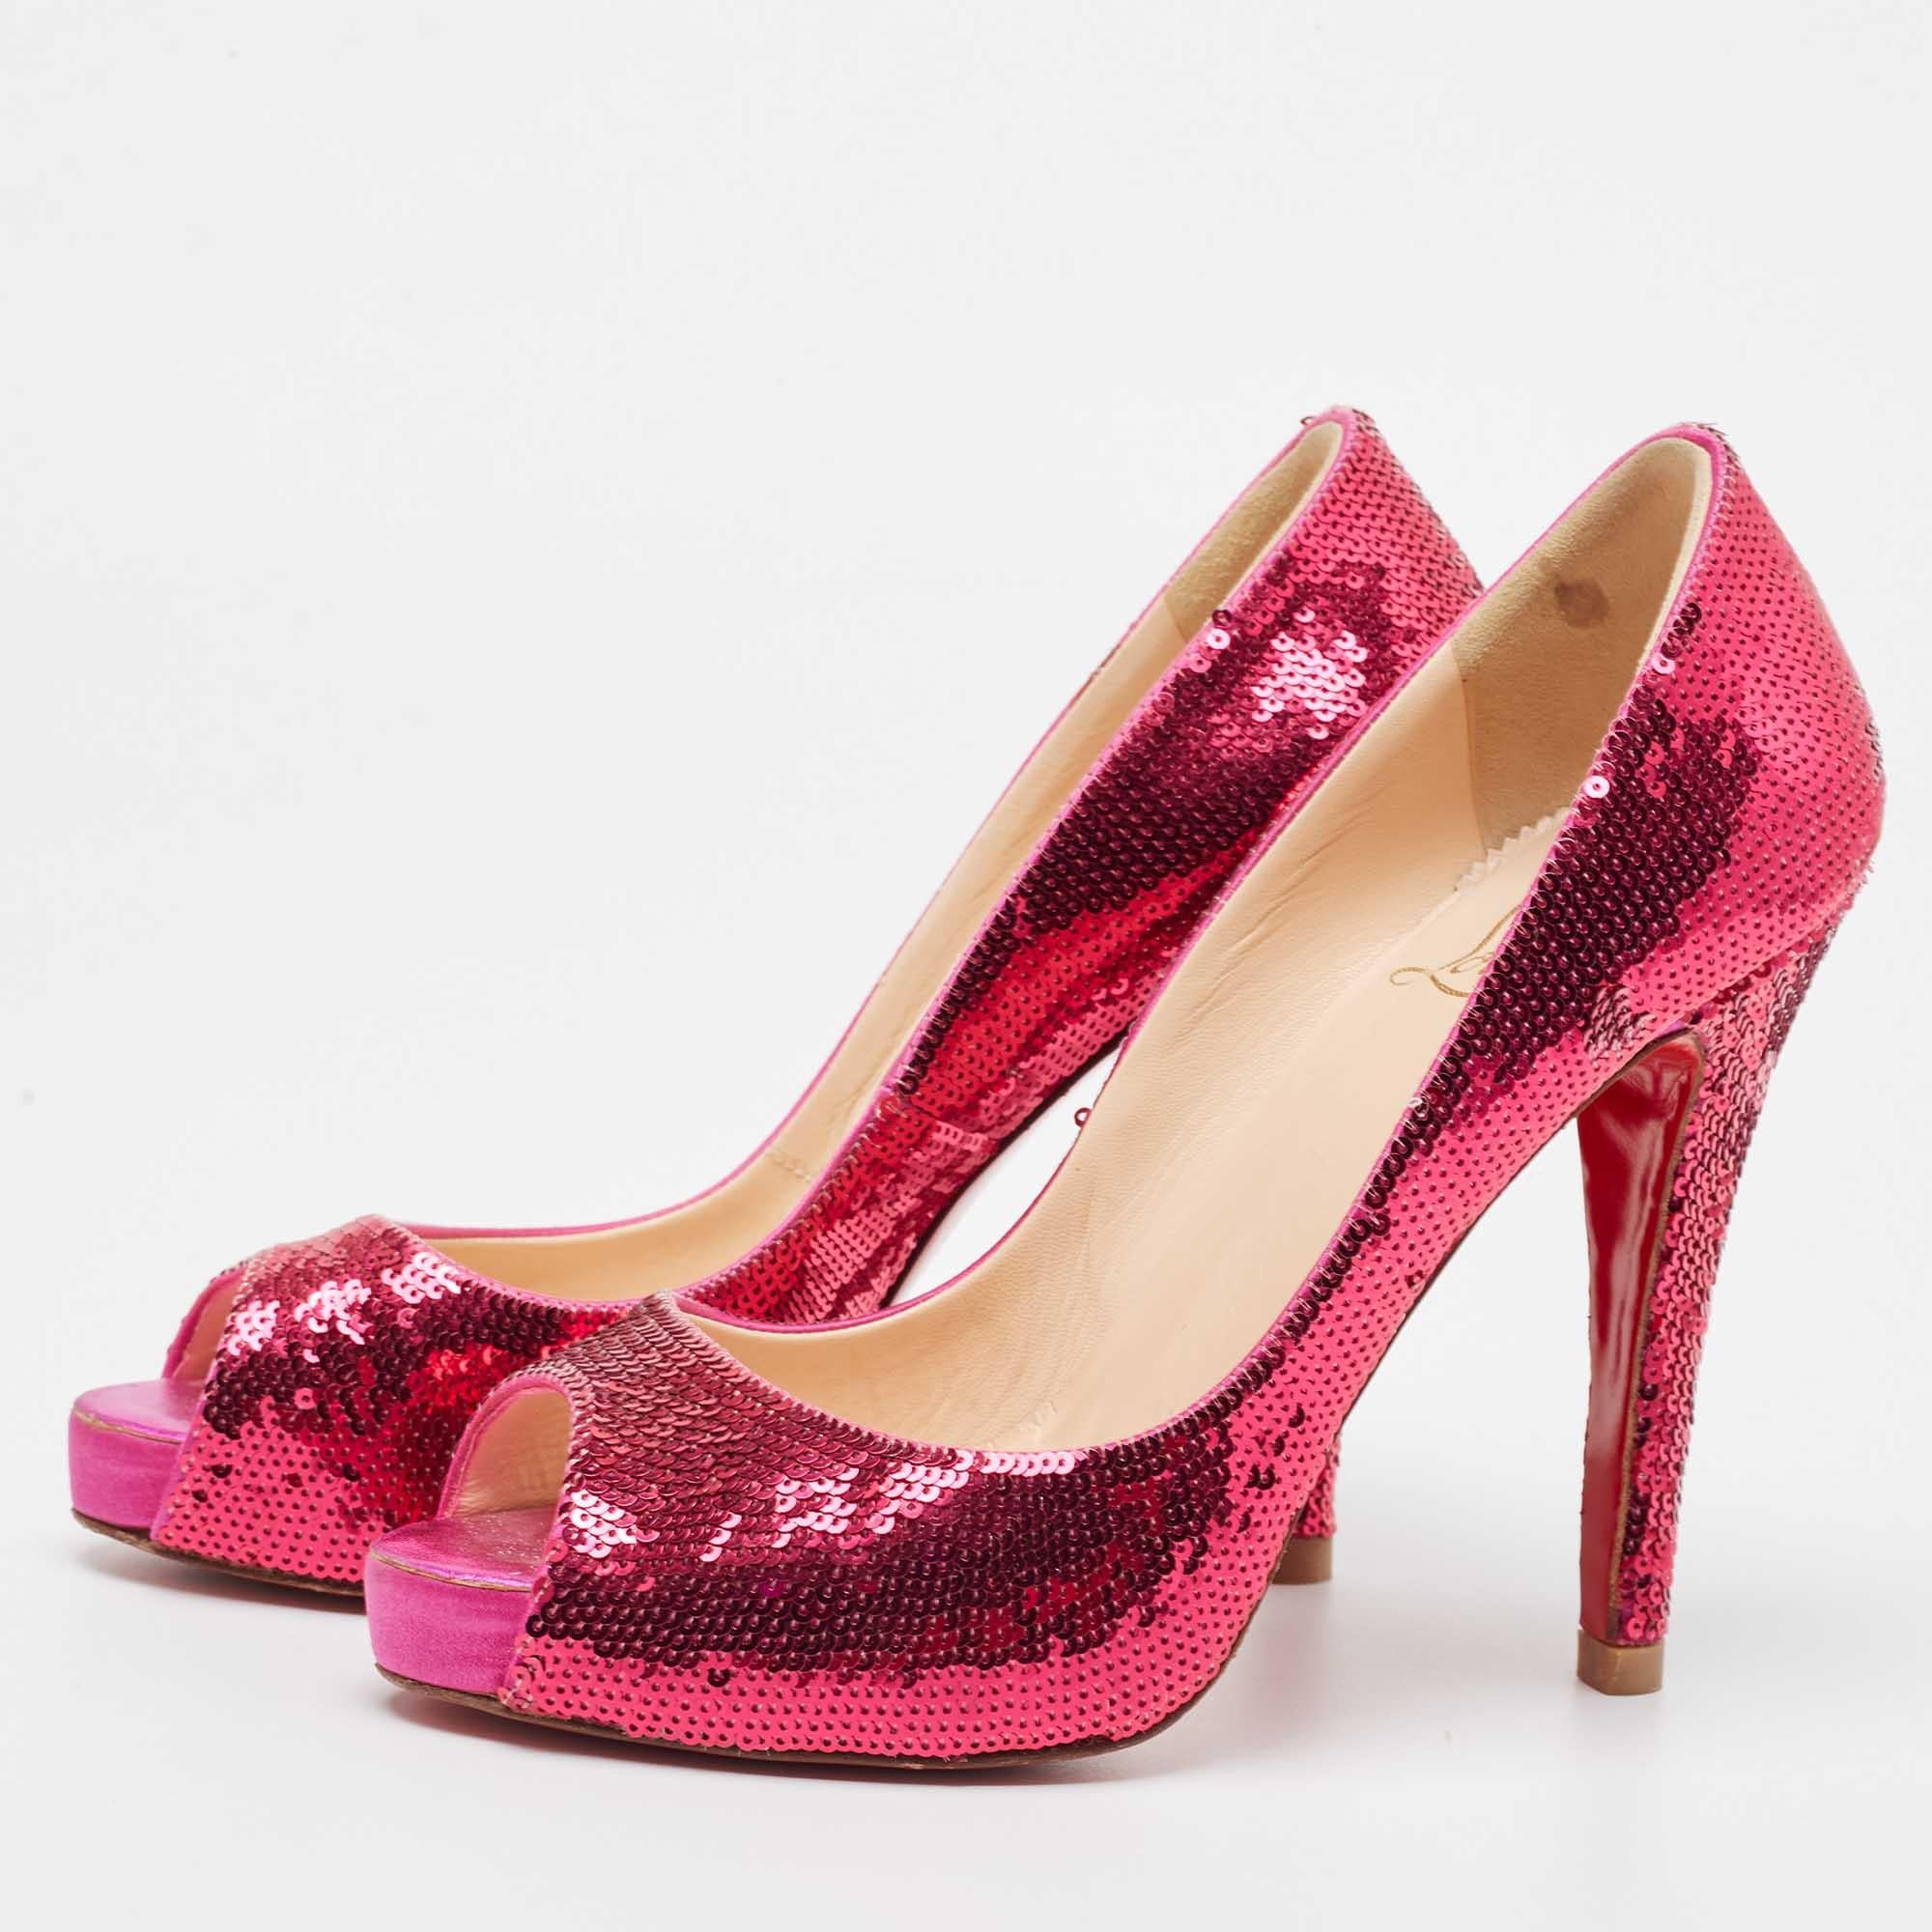 Christian Louboutin Pink Sequin Very Prive Pumps Size 37 For Sale 4